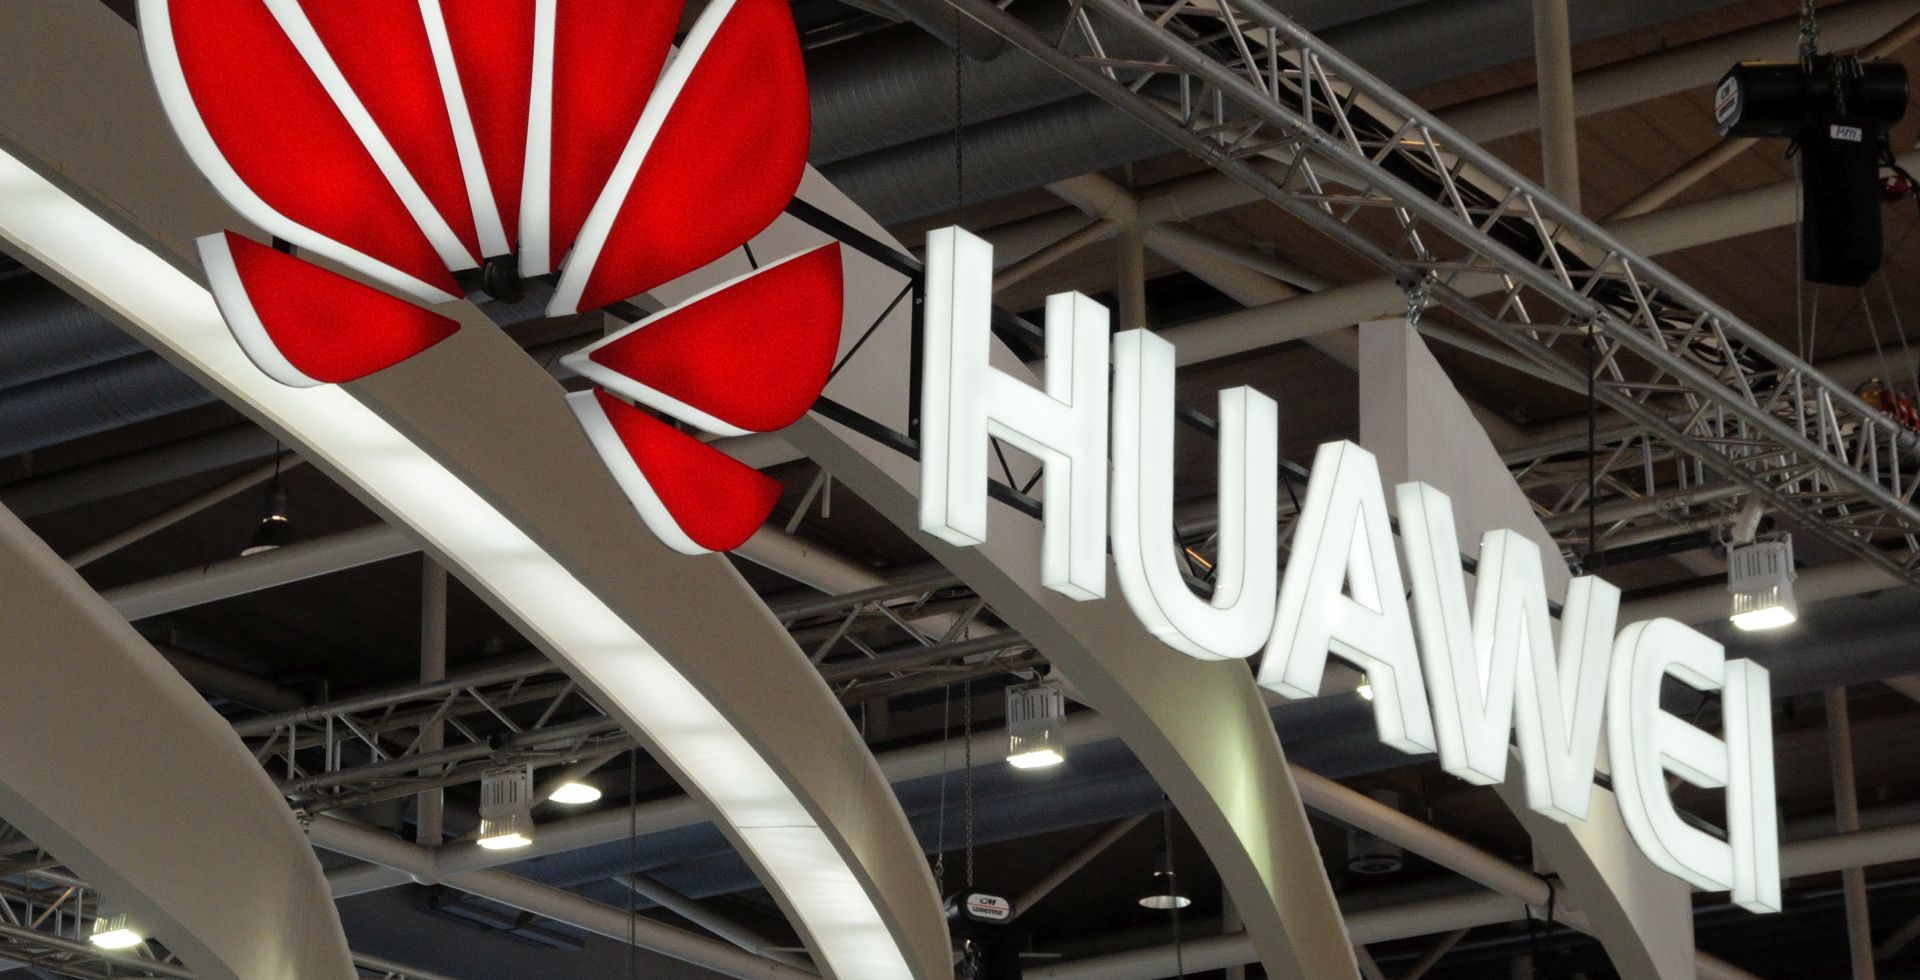 epa07574132 (FILE) - An image of the company logo of the Chinese IT company and service provider Huawei, at the CeBit trade fair in Hanover, 06 March 2012 (reissued 16 May 2019). According to media reports on 16 May 2019, the US Commerce Department added Huawei Technologies Co Ltd. to the Bureau of Industry and Security (BIS) Entity List, which prohibits the company from obtaining technology from US firms without explicit government approval. The decision was made on national security grounds, as US has accused Huawei, a Chinese telecommunications firm, of potentially conducting espionage on behalf of the Chinese government with the implementation of its 5G network.  EPA/MAURITZ ANTIN